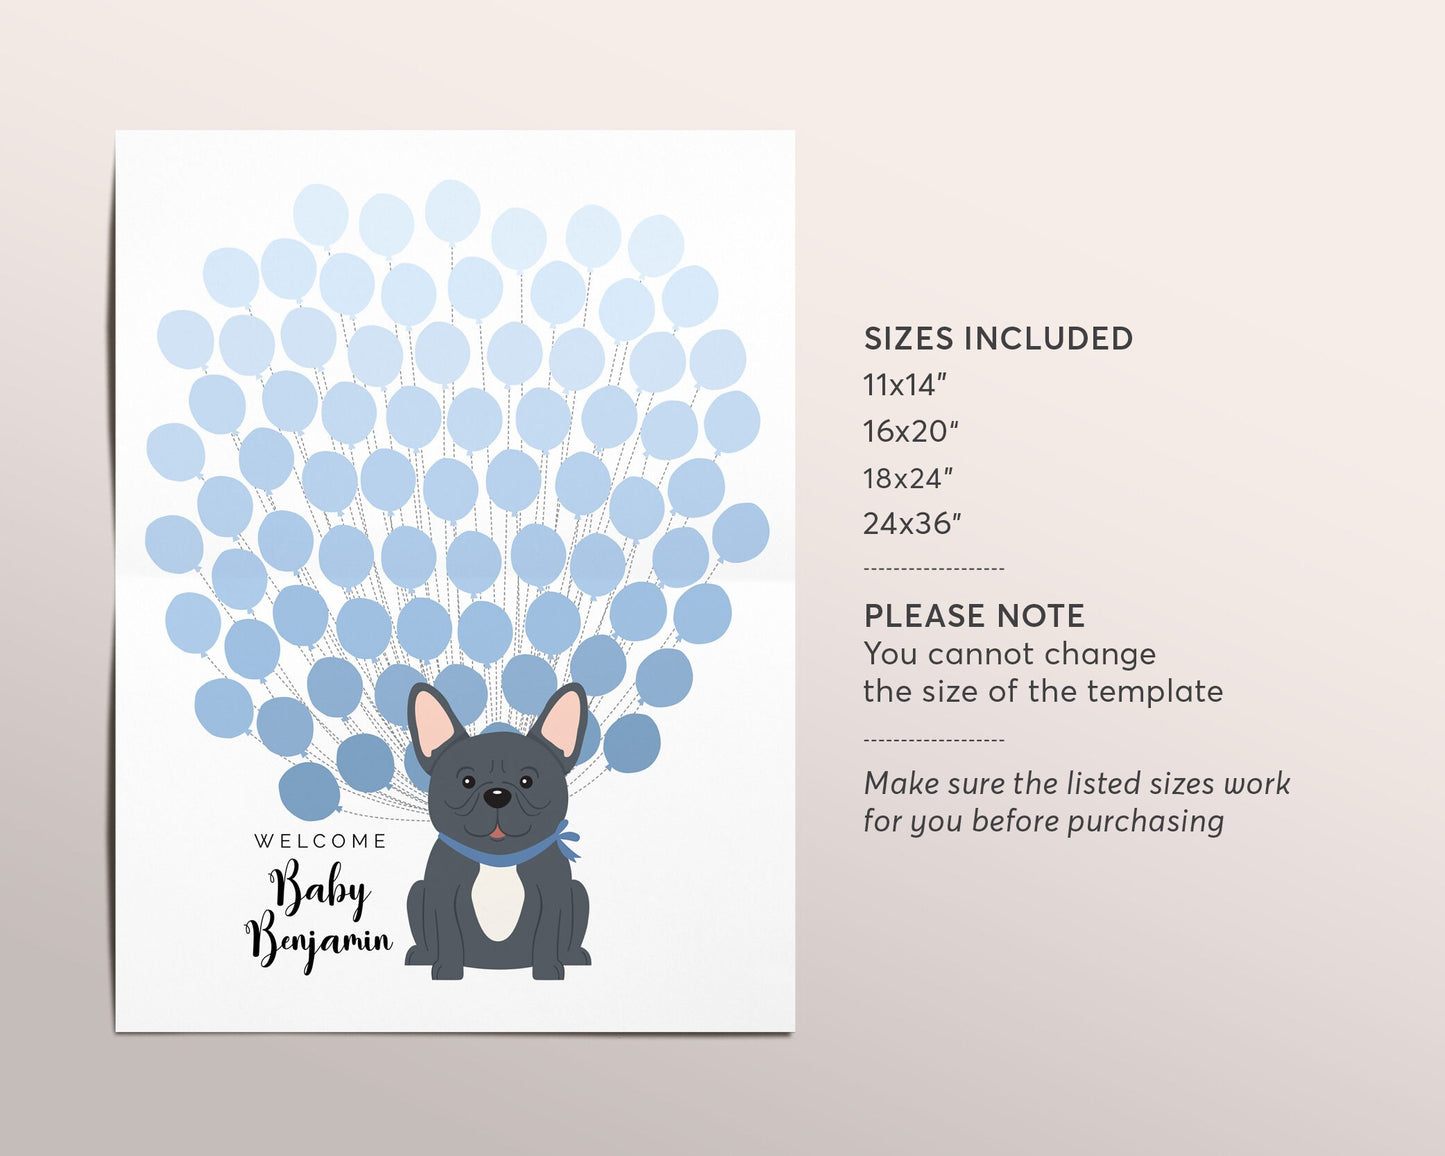 Editable French Bulldog Balloons Blue Baby Boy Shower Guest Book Alternative Template, Dog Puppy Pet Animal Theme Guestbook Sign